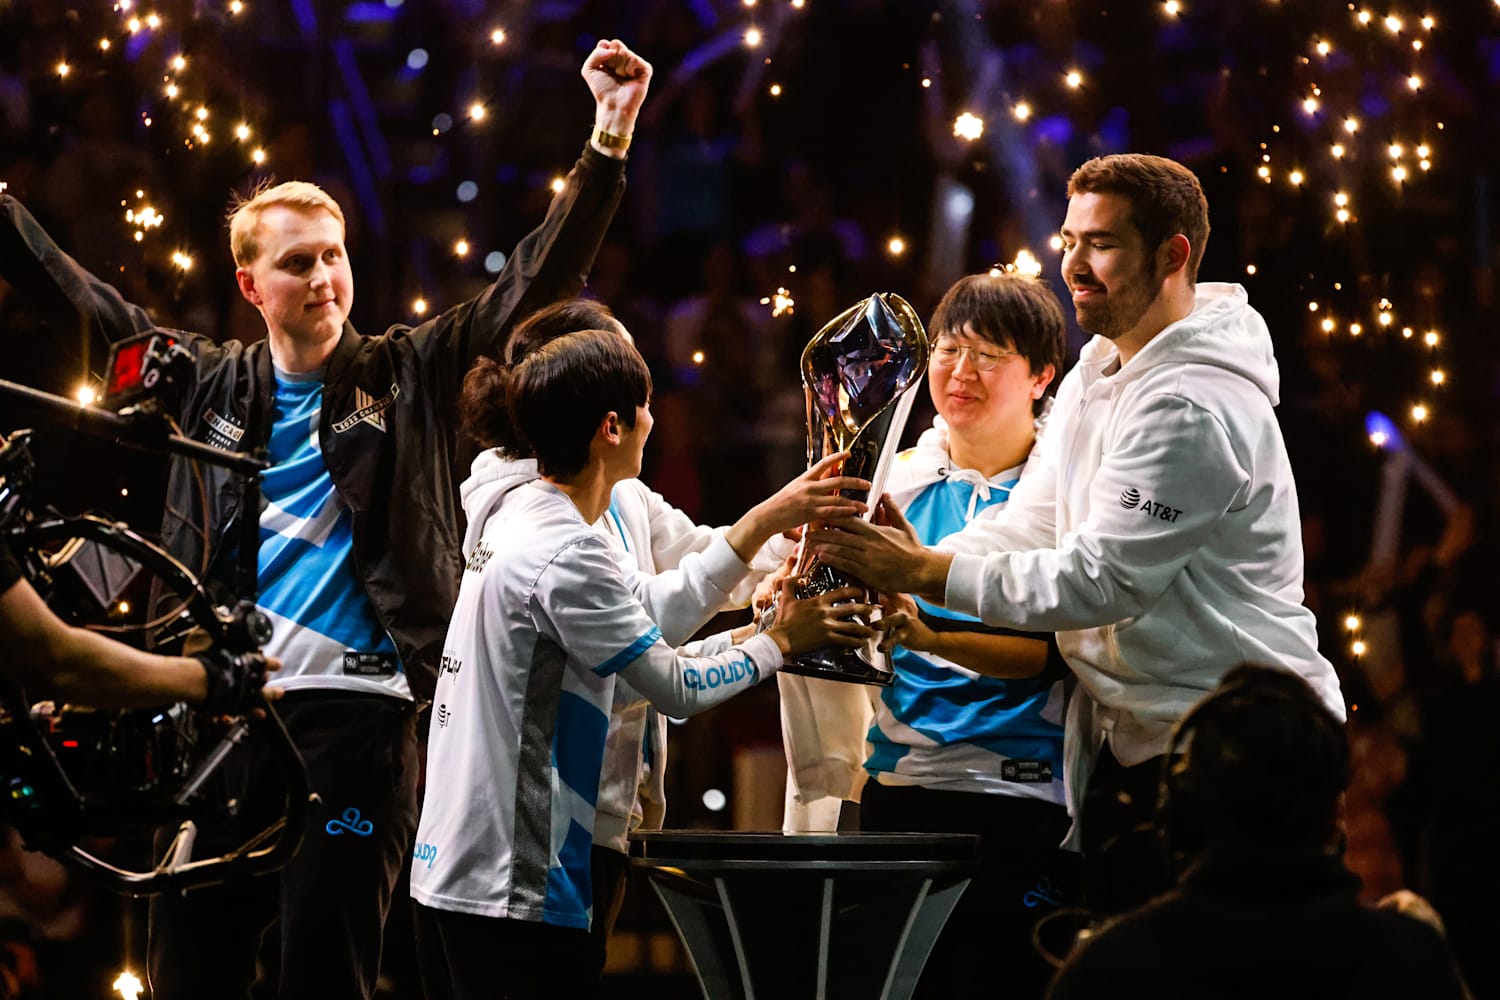 The Best LCS Champion Picks for Solo Queue